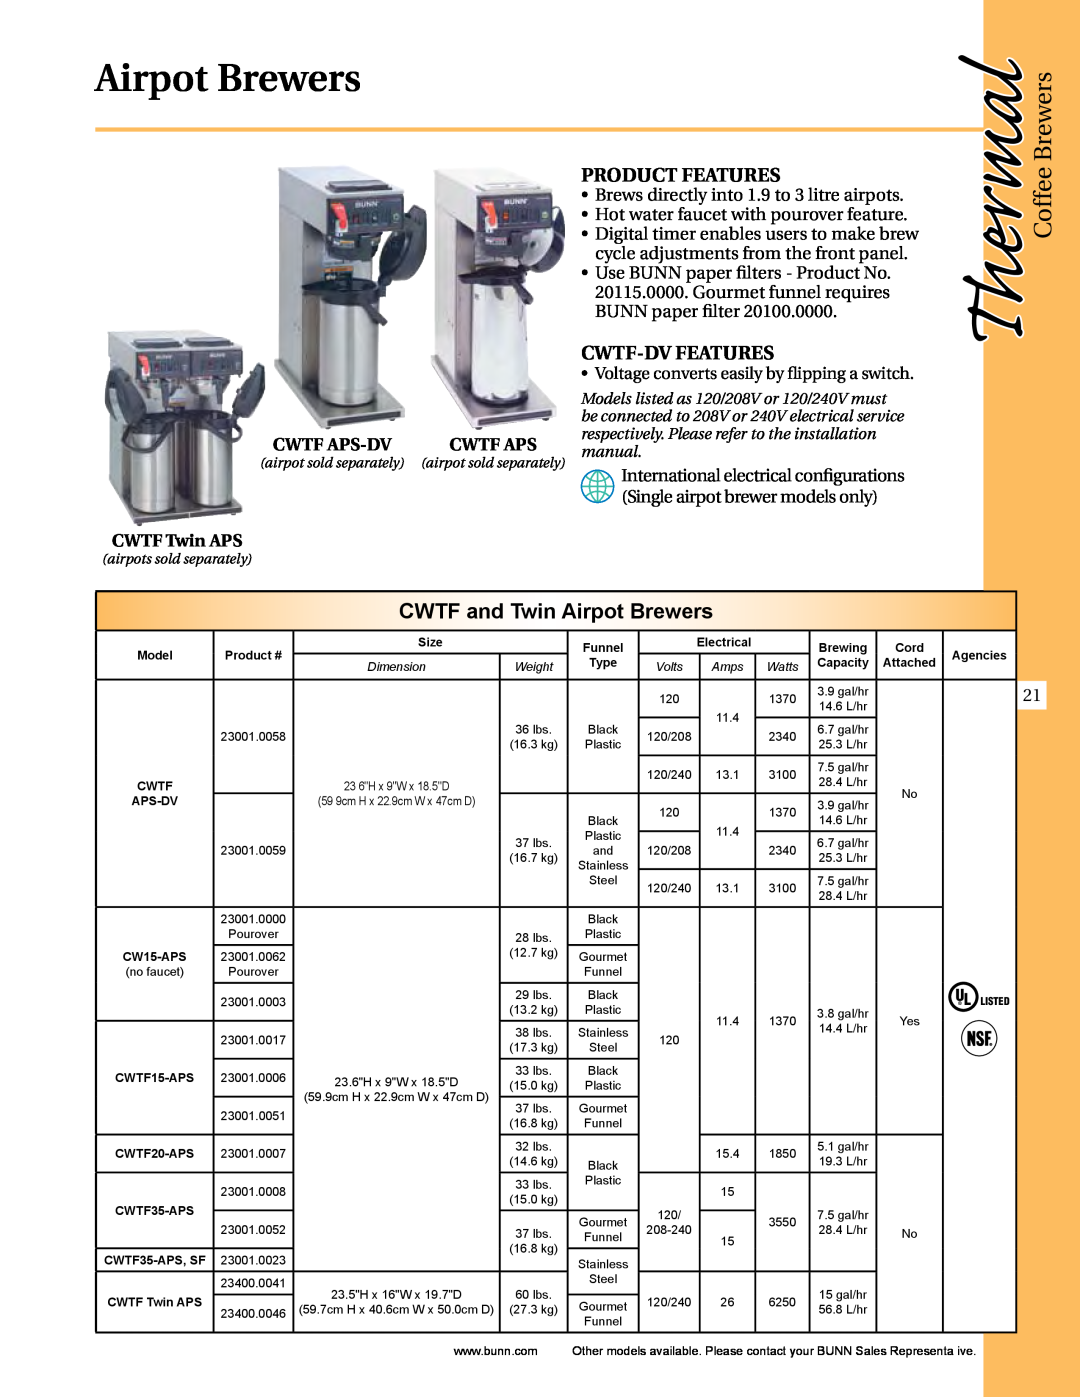 Thermal Comfort ICB-DV CWTF and Twin Airpot Brewers, Product Features, Cwtf-Dv Features, Cwtf Aps-Dv, CWTF Twin APS 